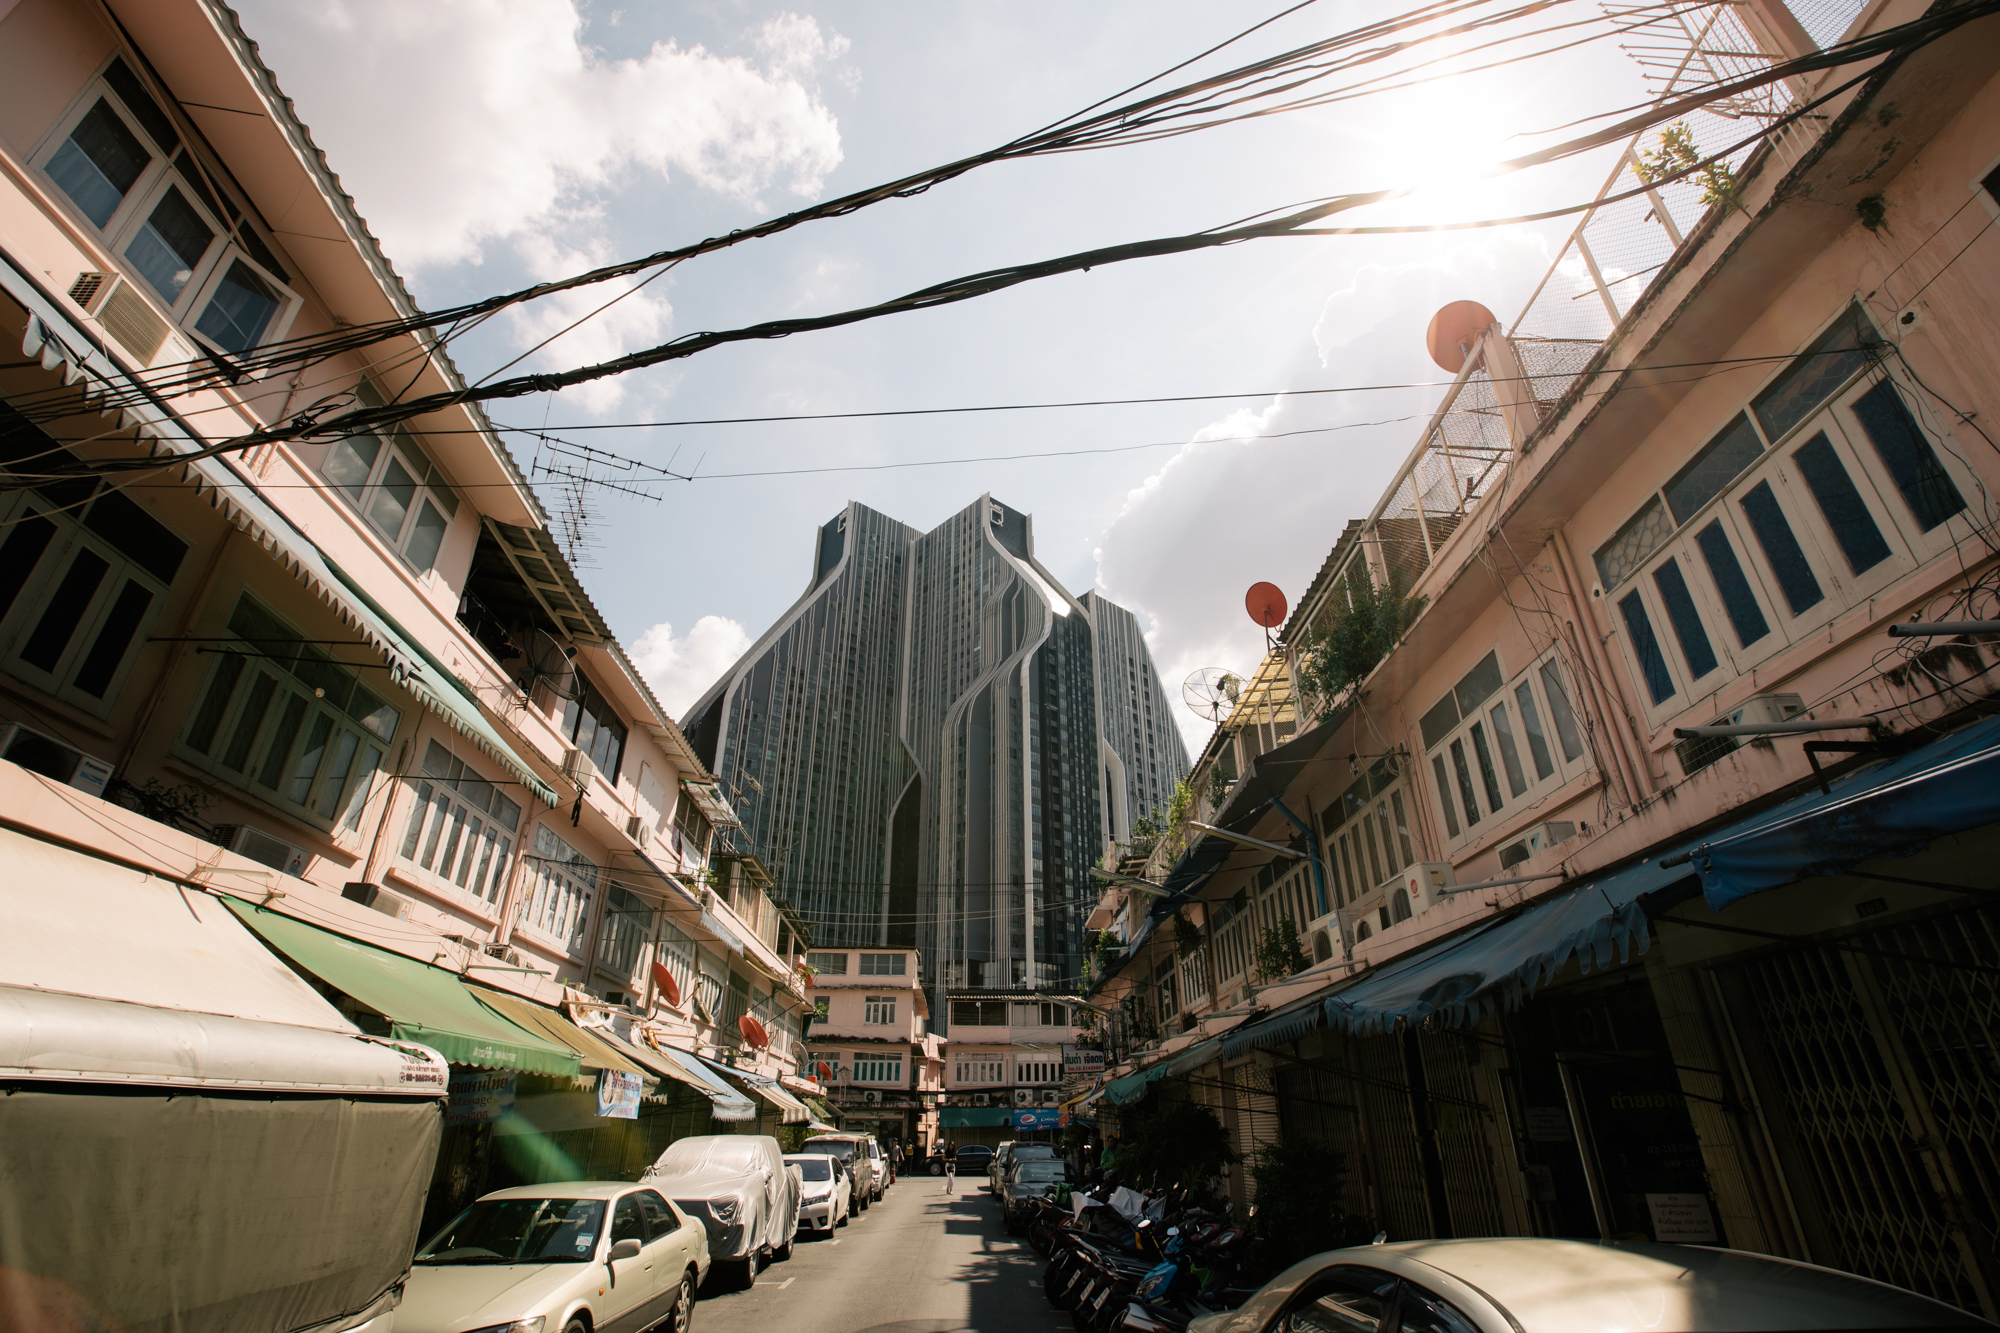 Photo of a street in Thailand with buildings on both sides by Imagine Thailand